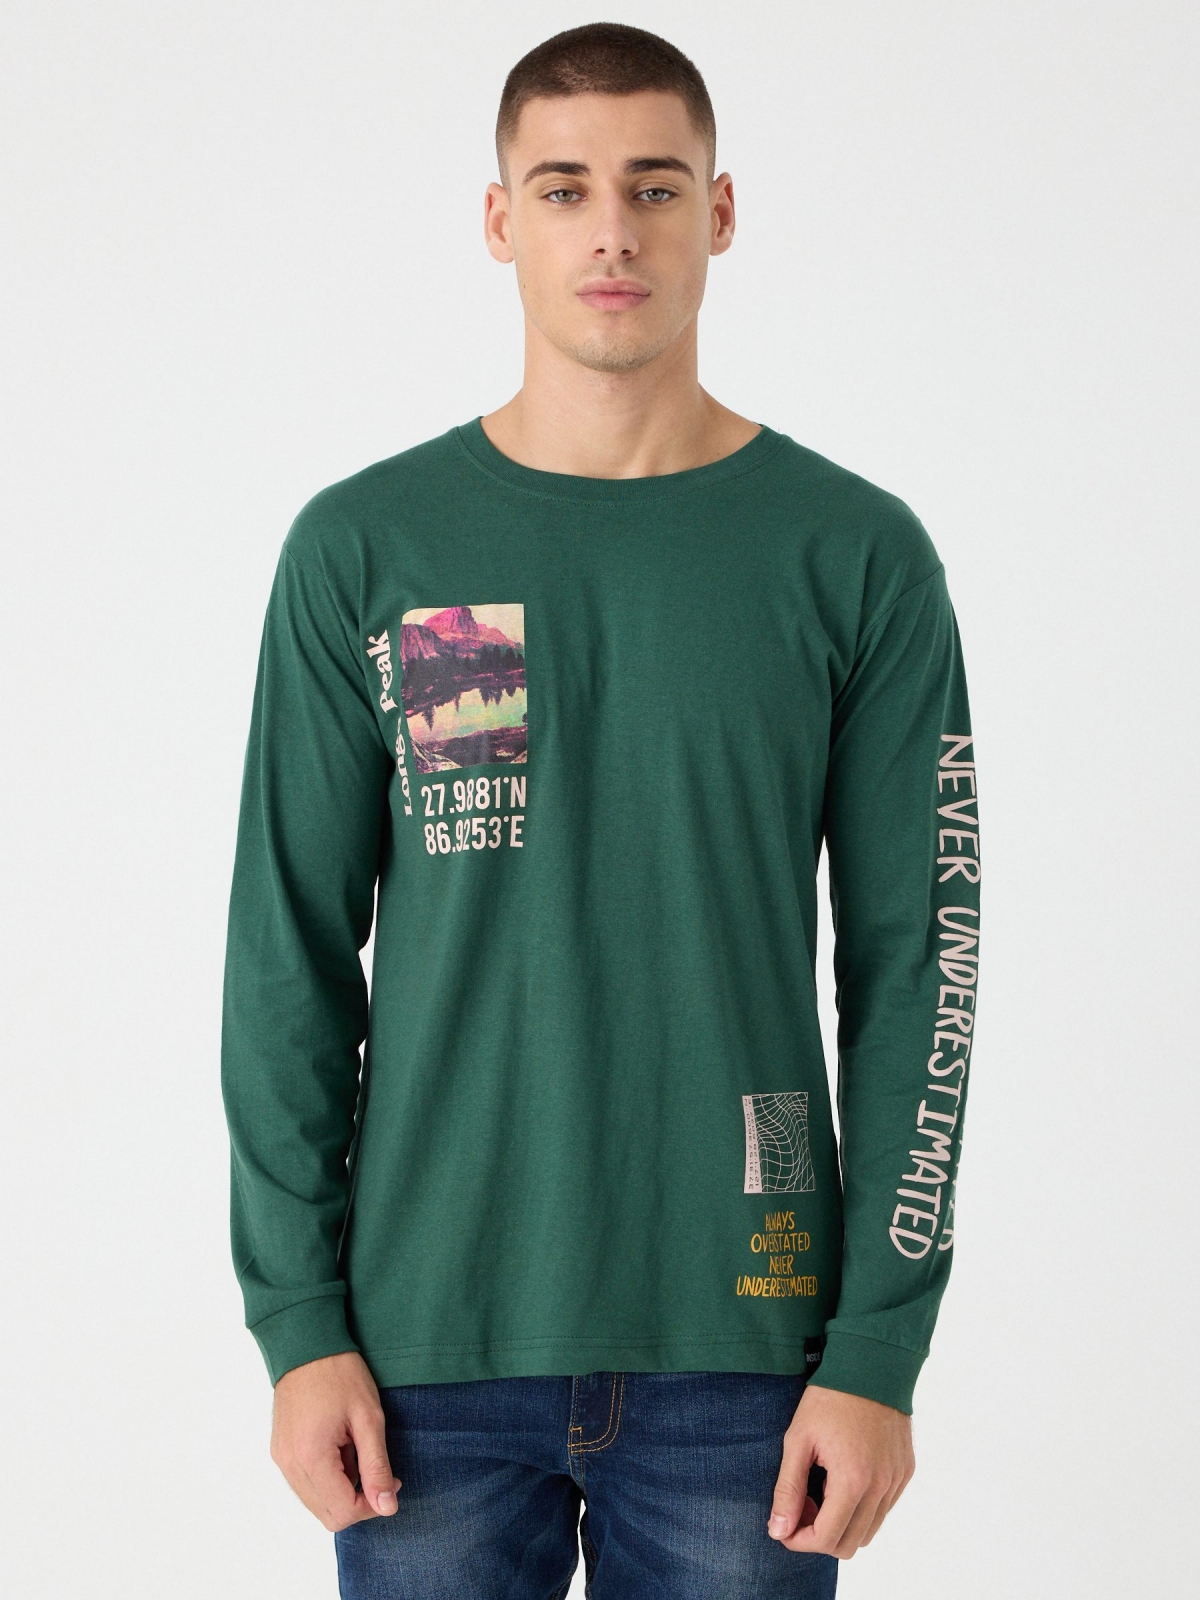 Photo print t-shirt dark green middle front view